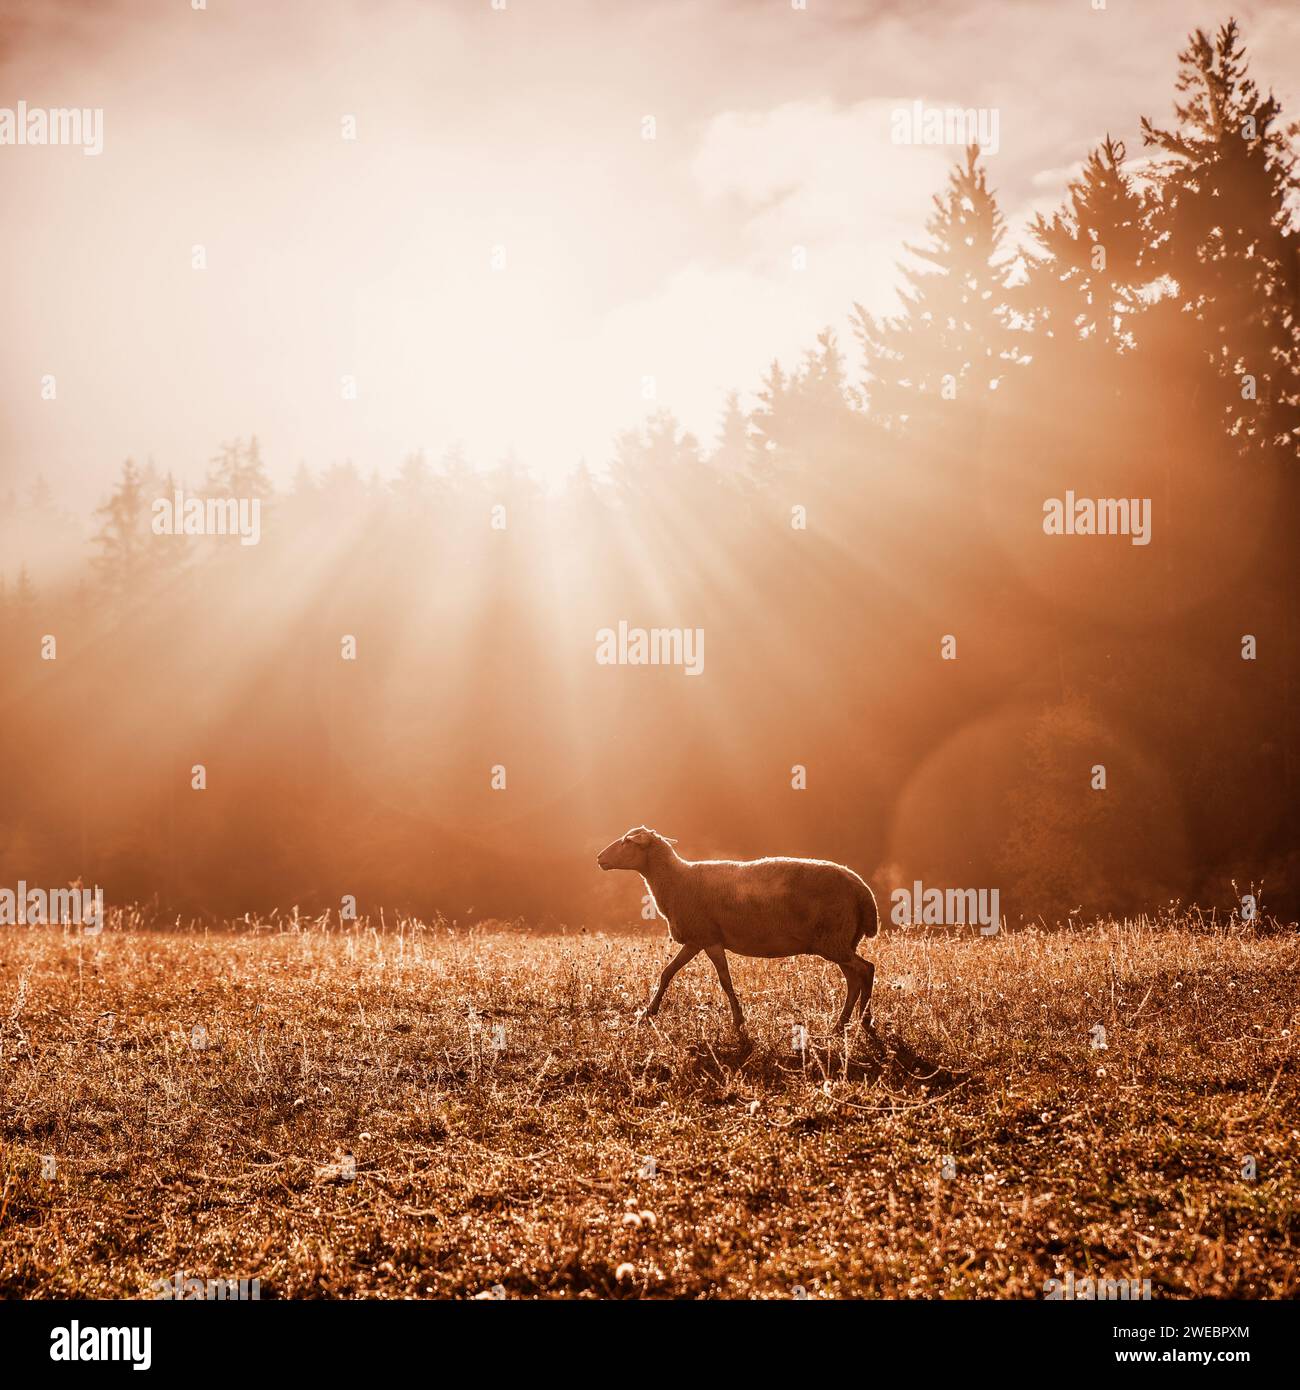 A lonely sheep in the autumn morning pasture. Square format, with an orange sunrise mood. Photo inspired by the Bible story about a lonely sheep and G Stock Photo